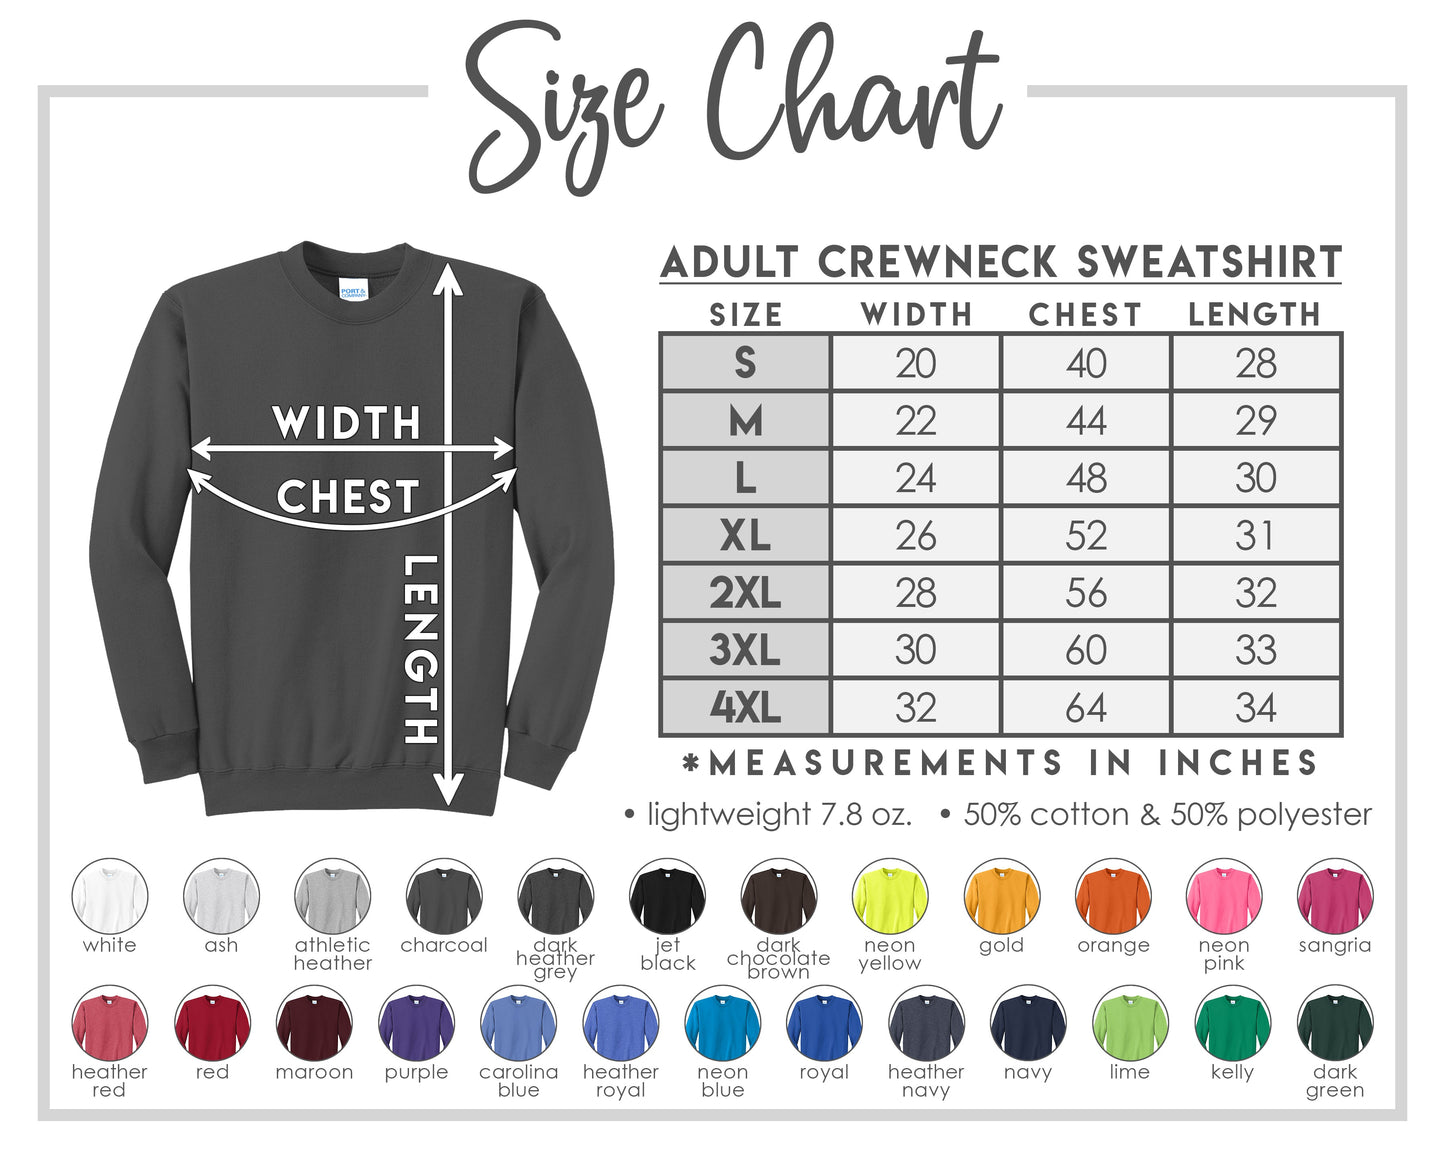 Kelly Grey Crewneck | ~2 week Delivery | Free School Pickup Available